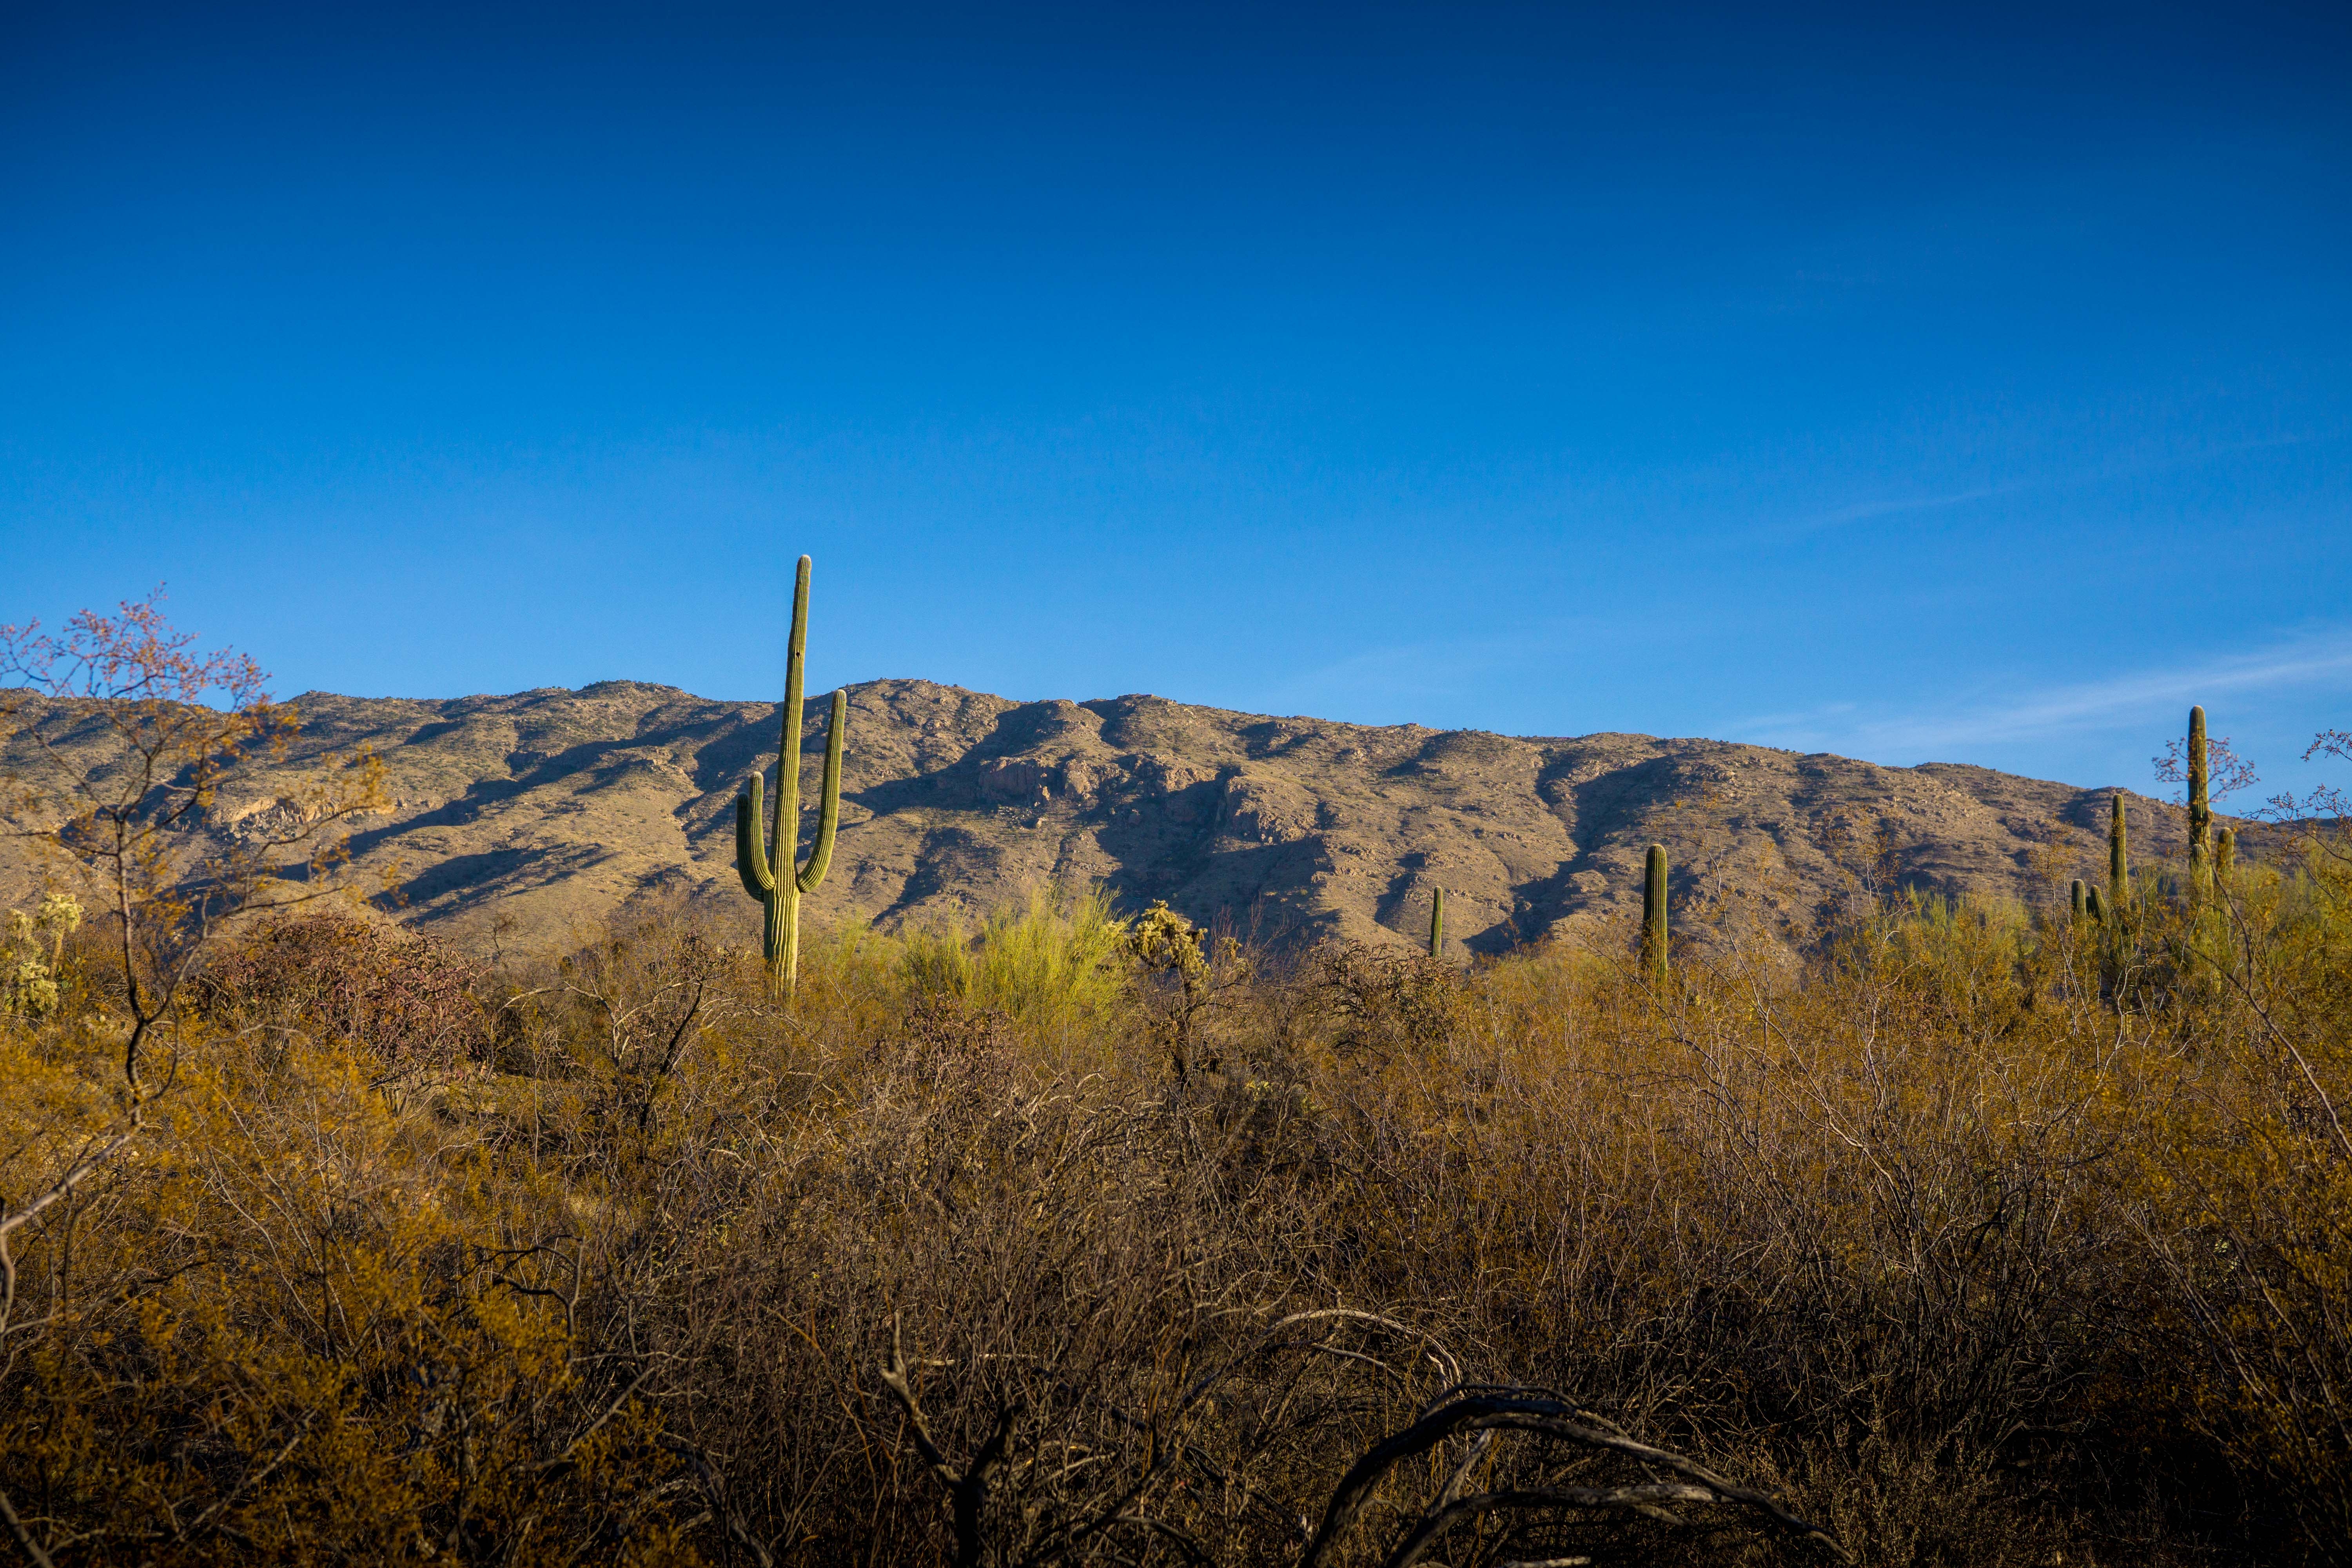 View from the Cactus Forest Loop drive in Saguaro National Park